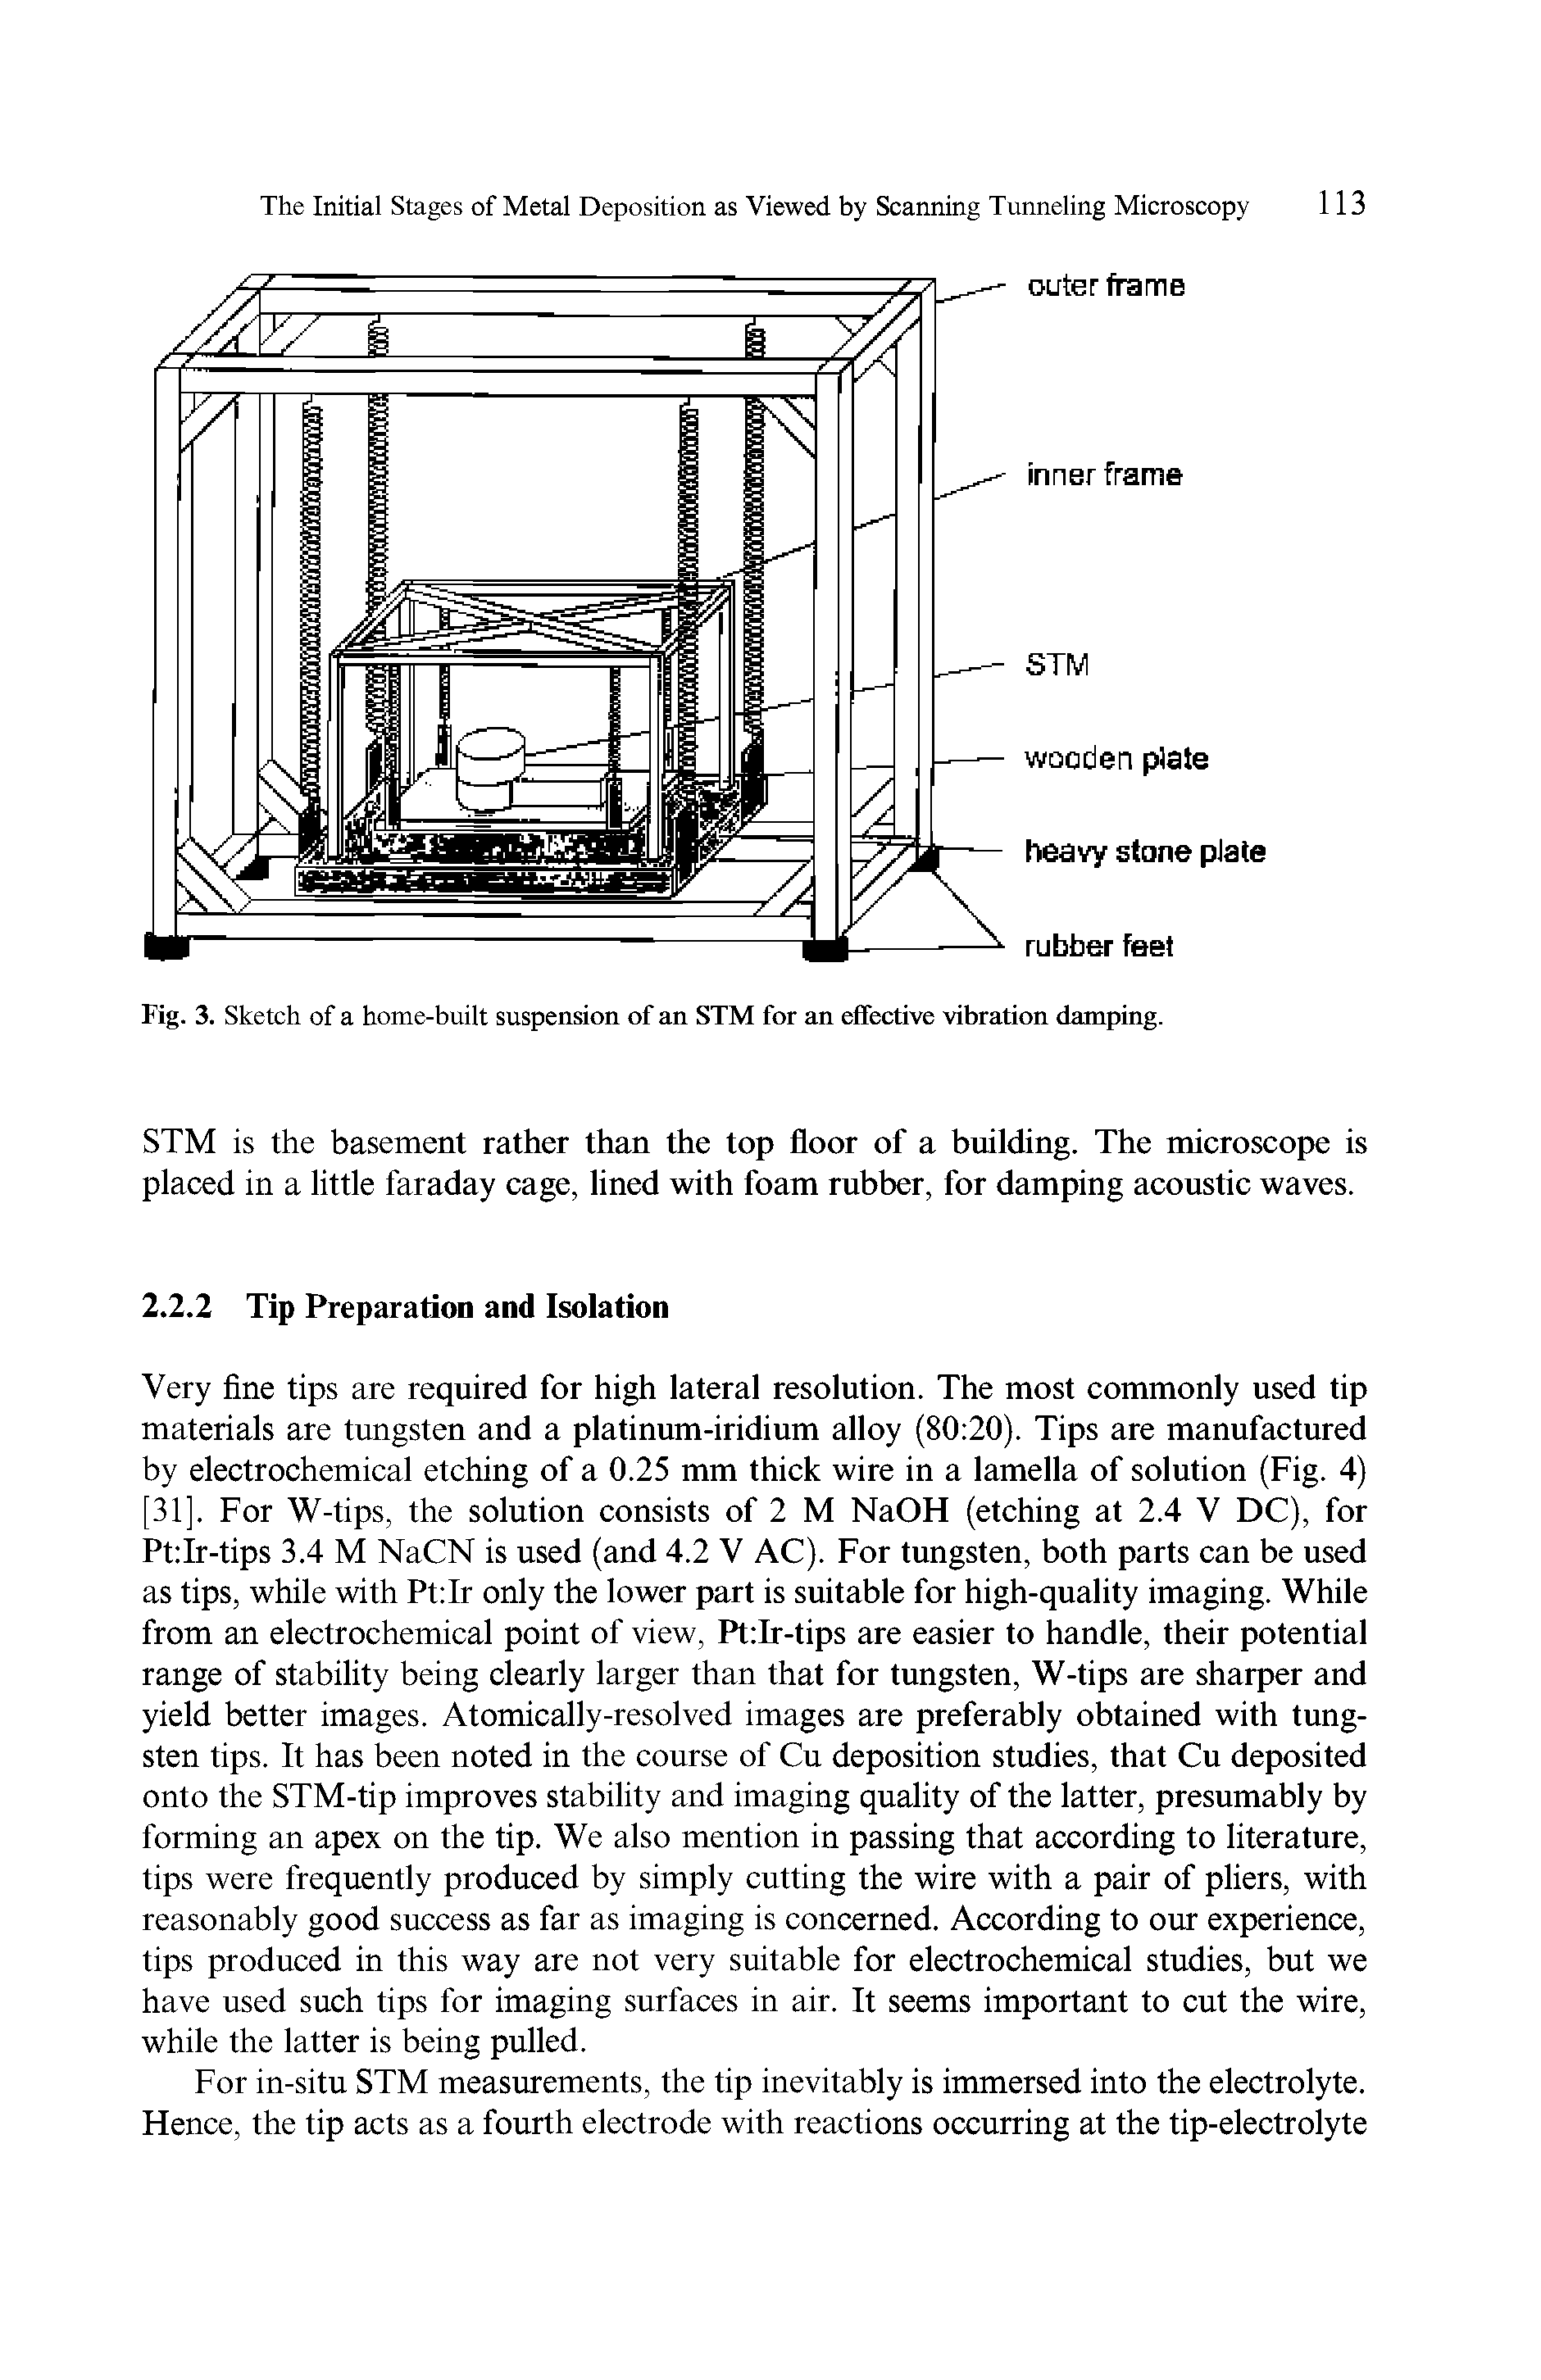 Fig. 3. Sketch of a home-built suspension of an STM for an effective vibration damping.